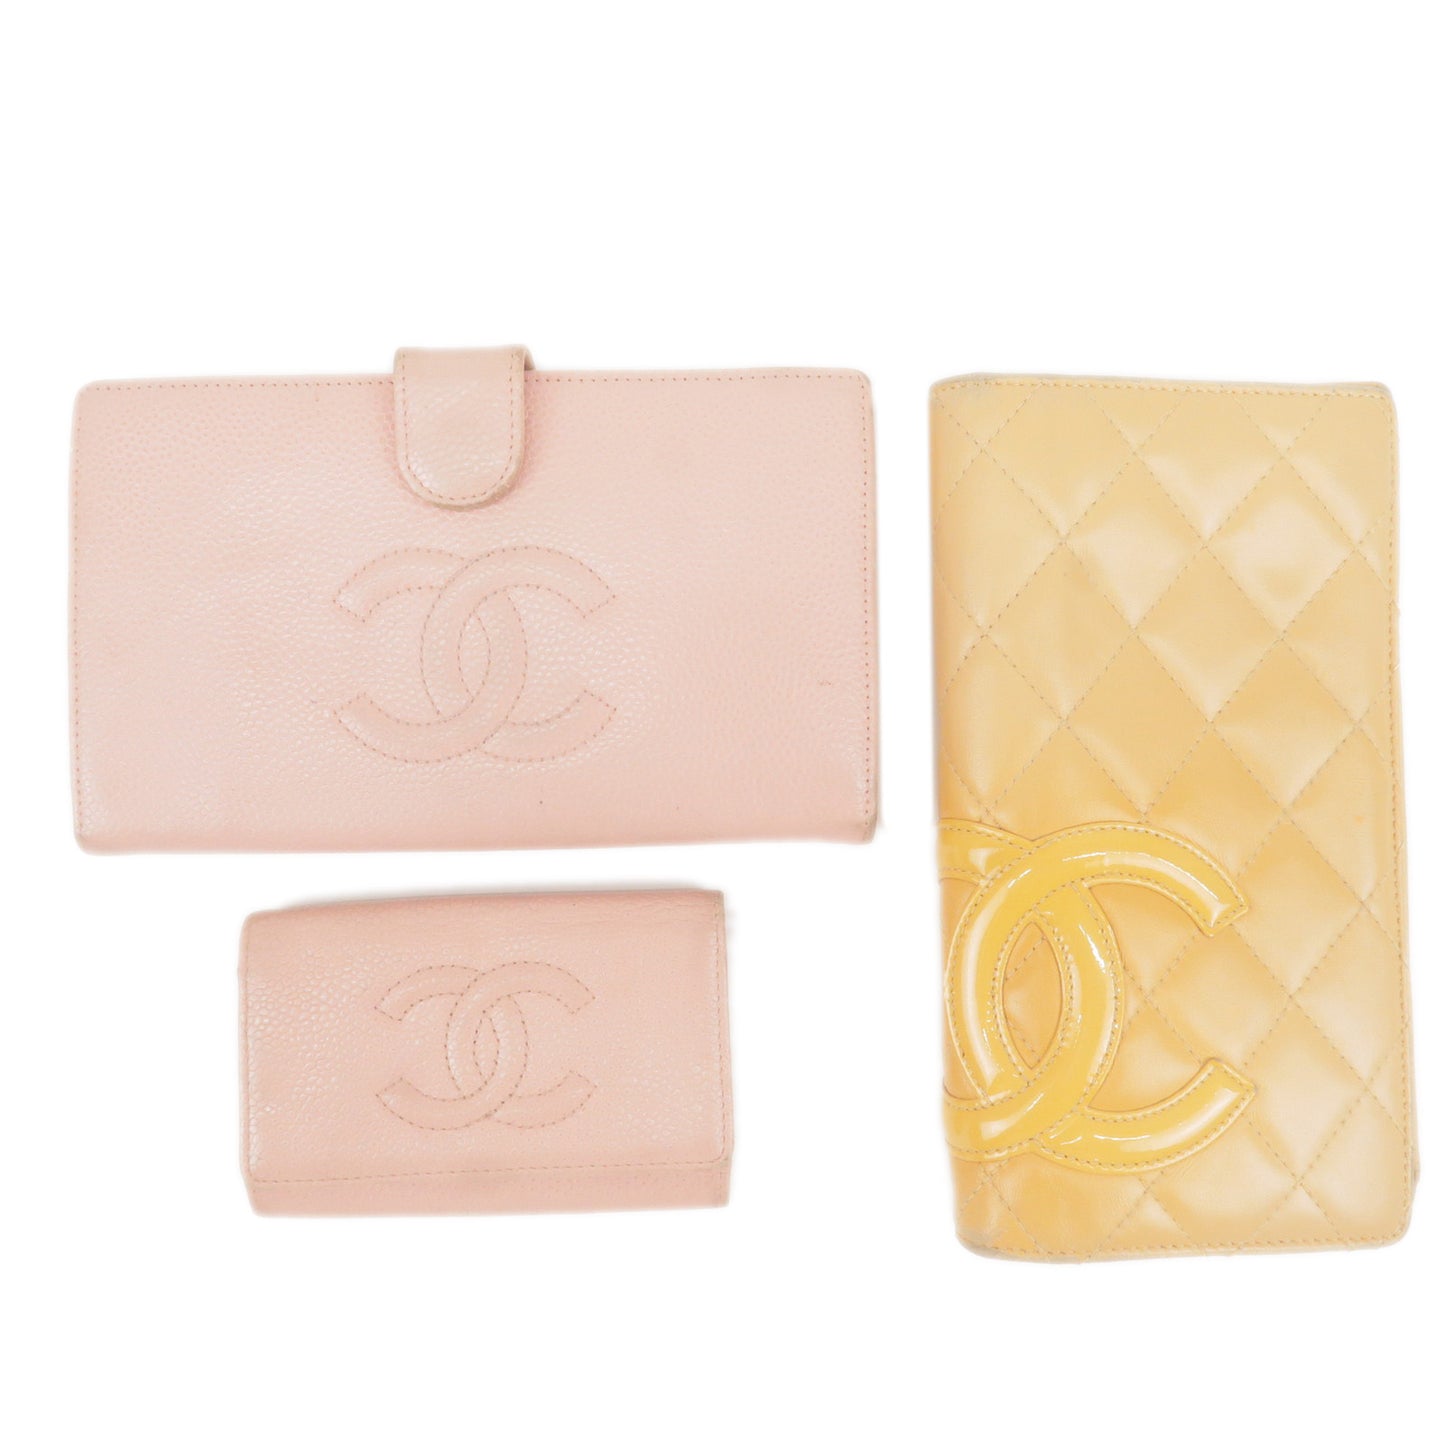 CHANEL-Set-of-3-Long-Wallet-Bifold-Wallet-and-Key-Case-Pink-Yellow